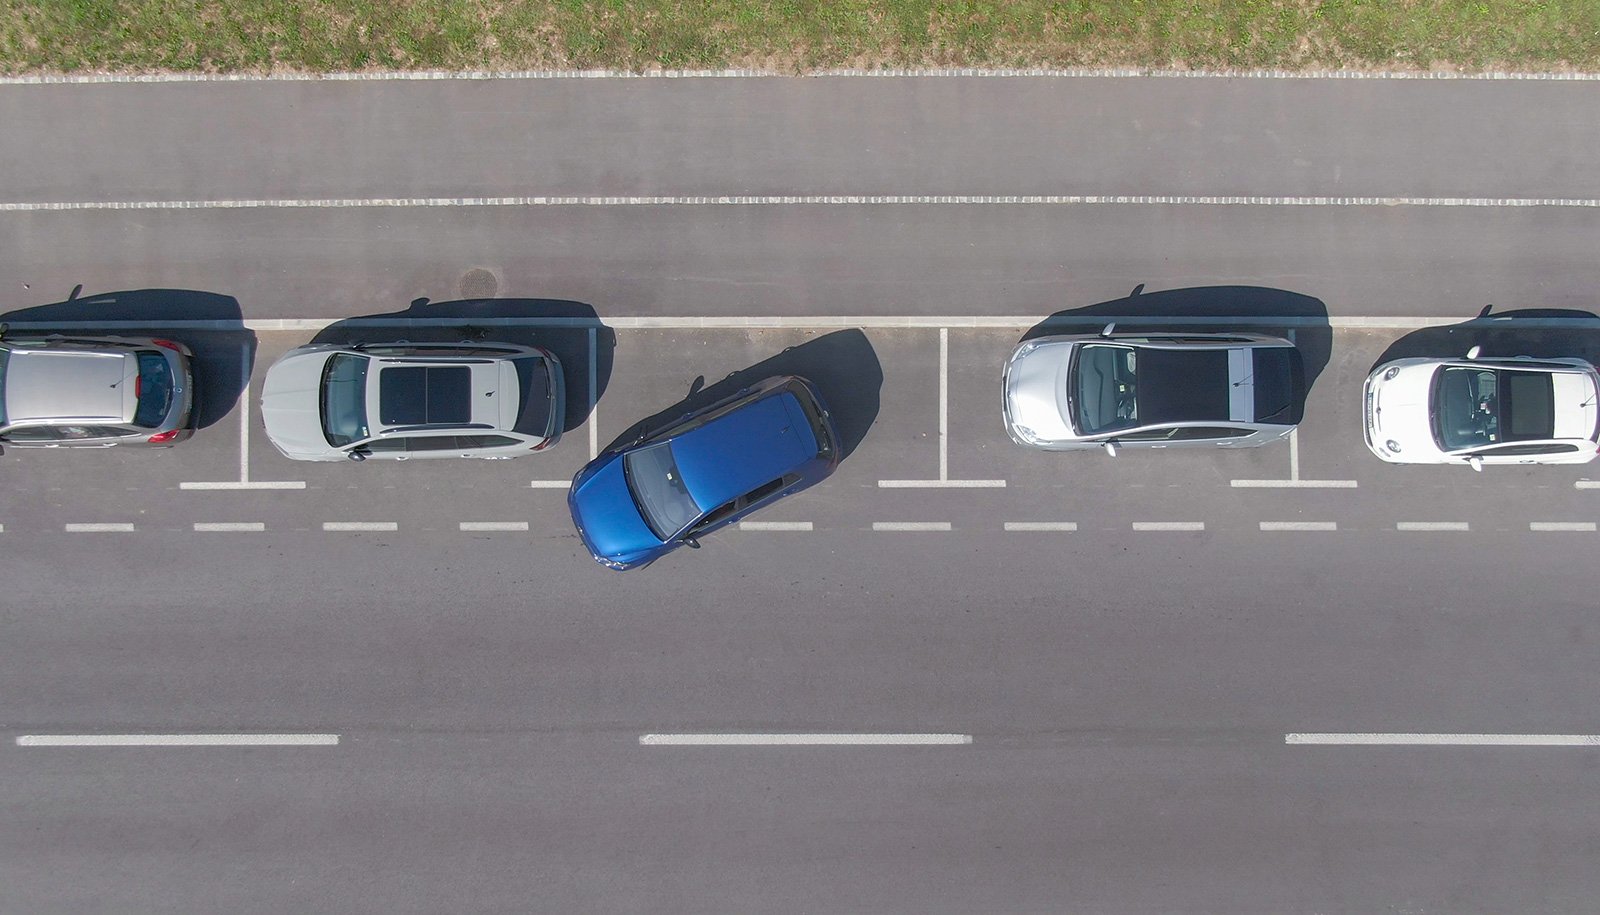 Parallel Parking: Easiest Way To Parallel Park